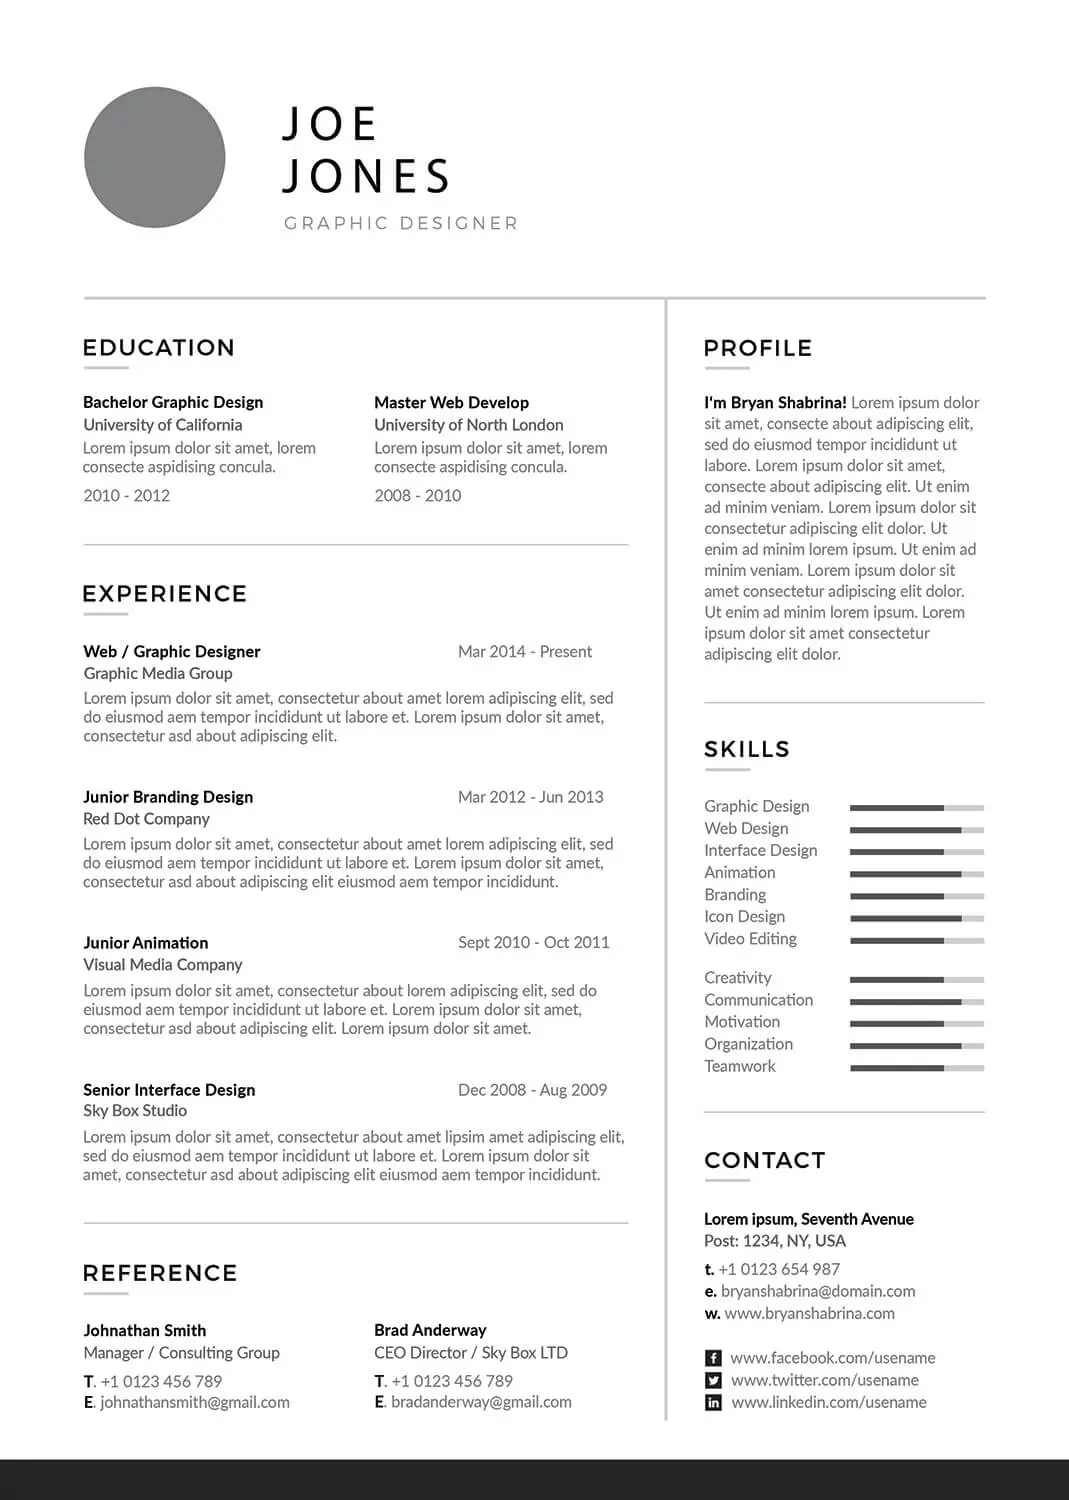 research-assistant-resume